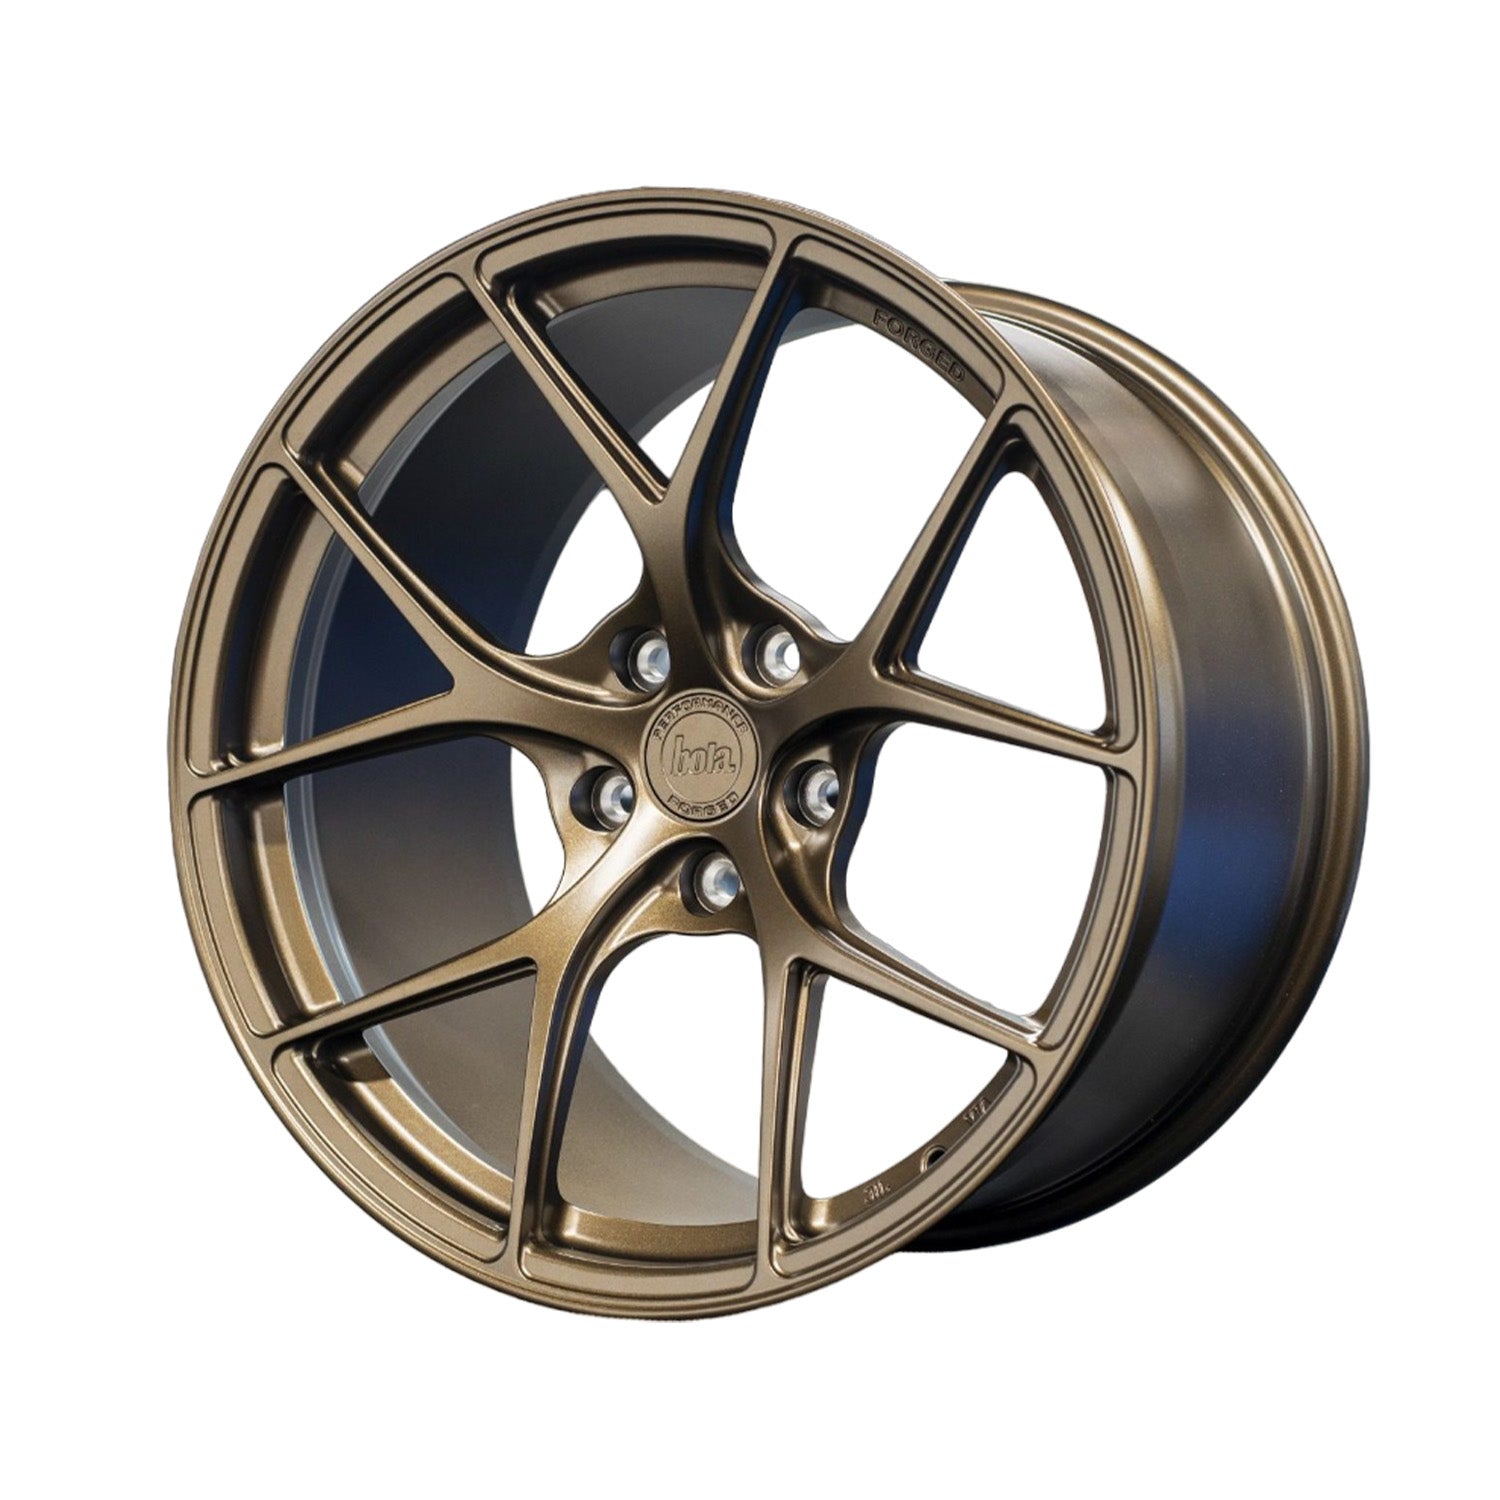 Bola FP2 19" Forged Alloy Wheels In Matte Bronze